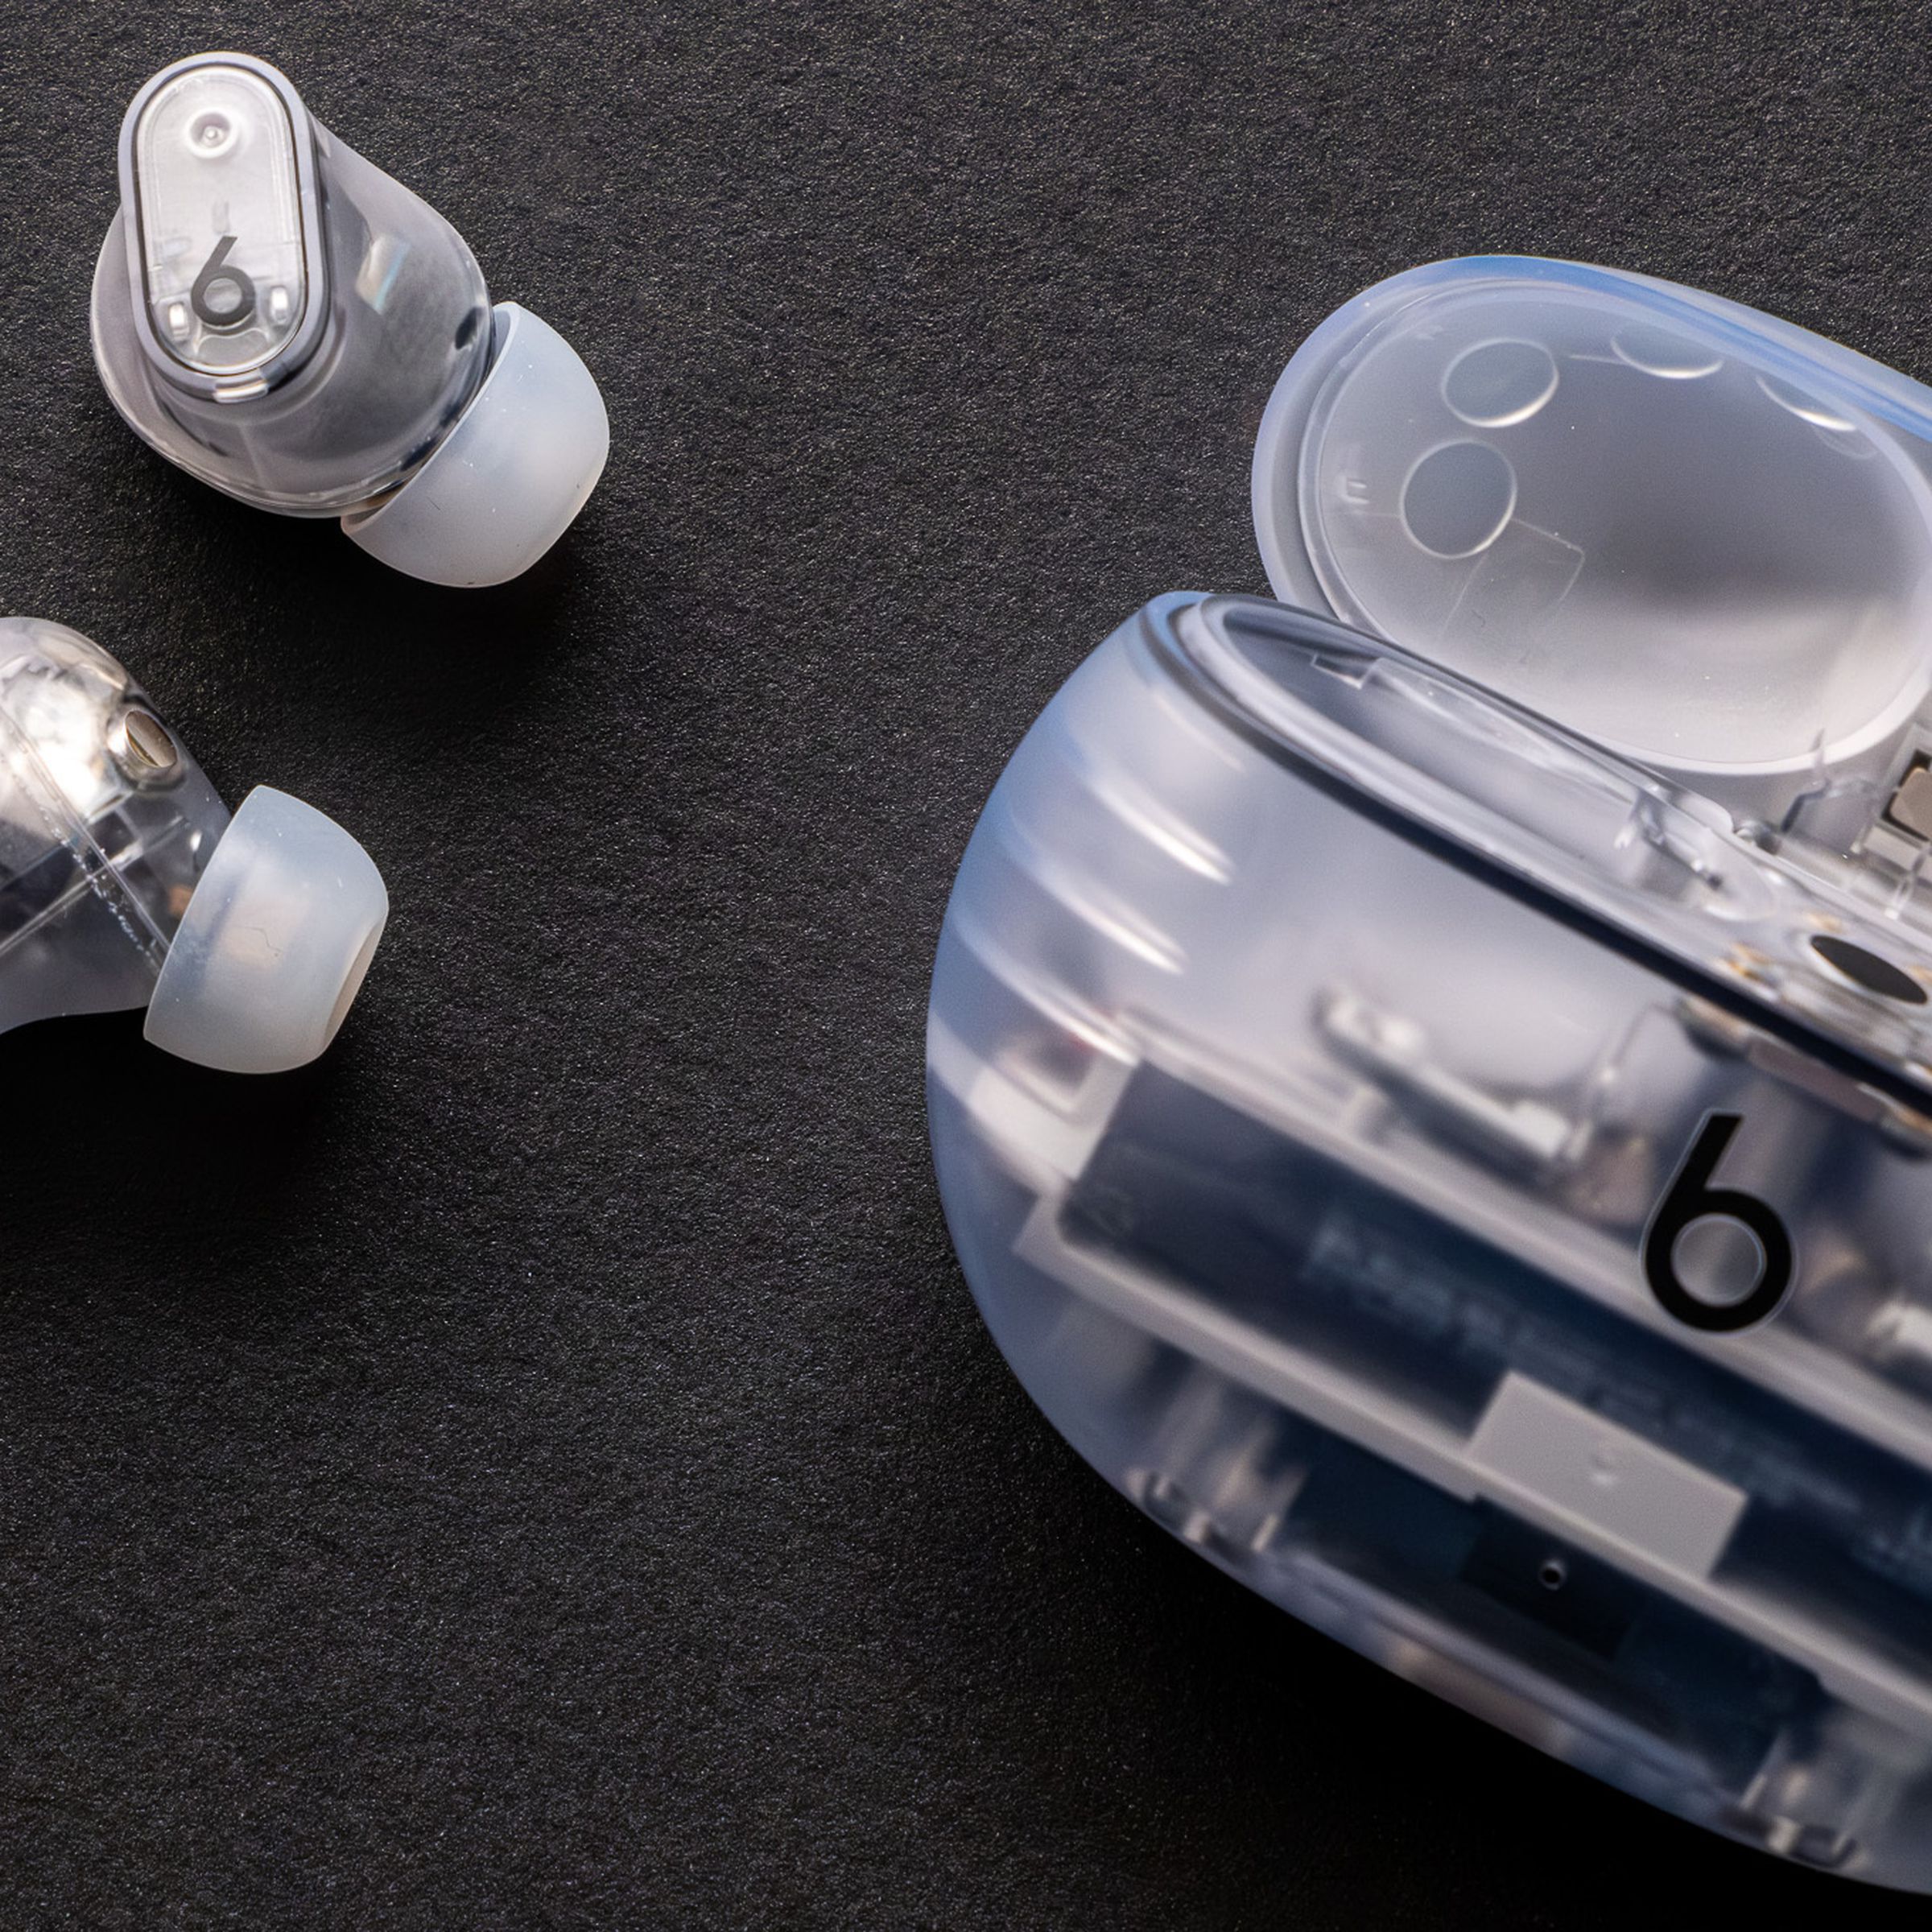 The see-through Beats Studio Buds Plus and their matching charging case, against a black background.